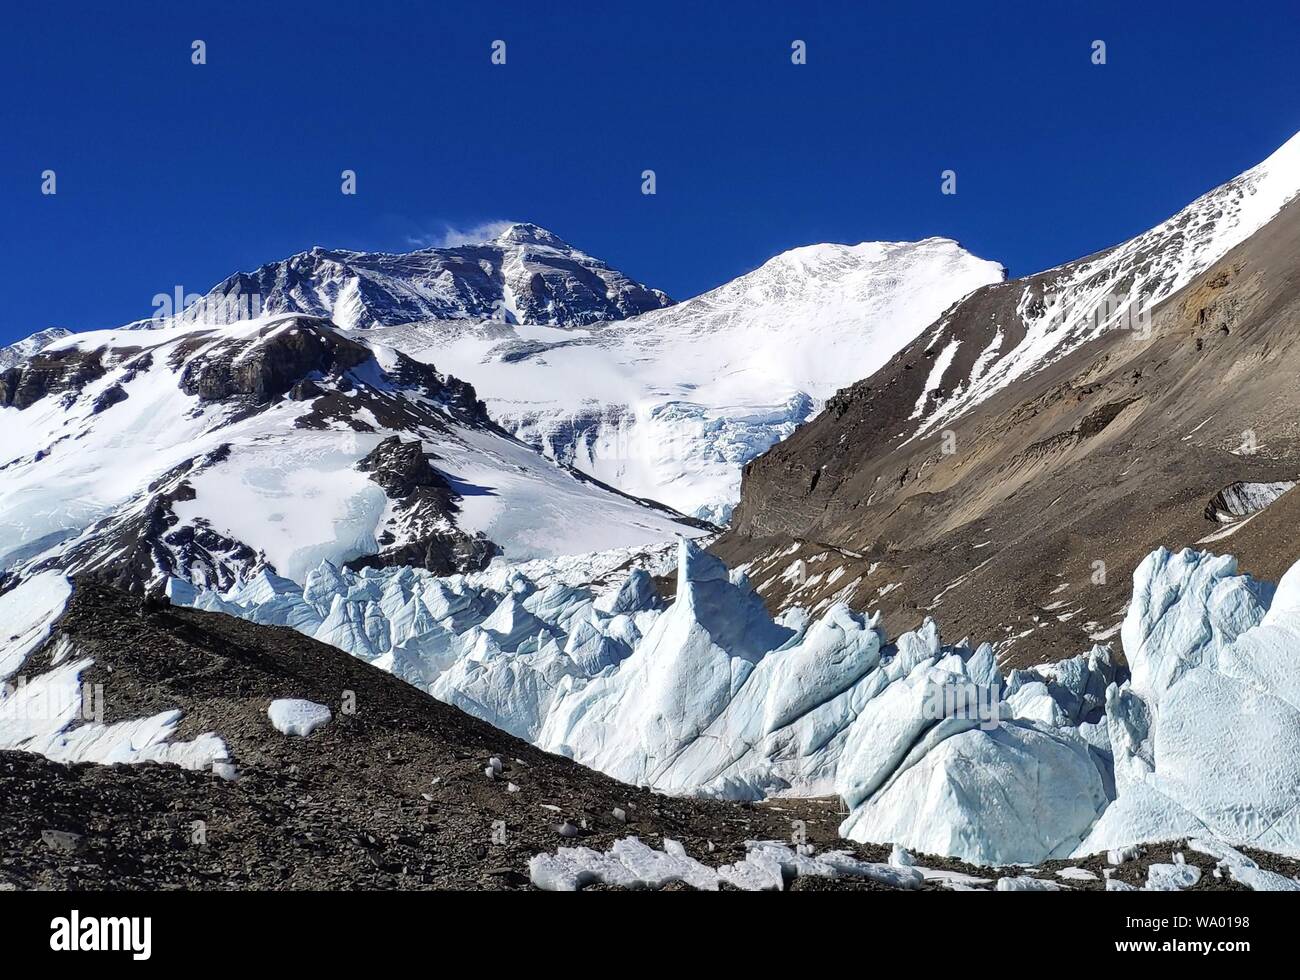 (190816) -- BEIJING, Aug. 16, 2019 (Xinhua) -- Photo taken on May 21, 2019 shows glacier on the foot of Mount Qomolangma in southwest China's Tibet Autonomous Region. Tibet has seen significant progress in restoring biodiversity, with a forest coverage rate of 12.14 percent, said a white paper released in March this year by China's State Council Information Office. The population of Tibetan antelopes has grown from 60,000 in the 1990s to more than 200,000 and Tibetan wild donkeys have increased in numbers from 50,000 to 80,000, noted the document, titled "Democratic Reform in Tibet -- Sixty Stock Photo